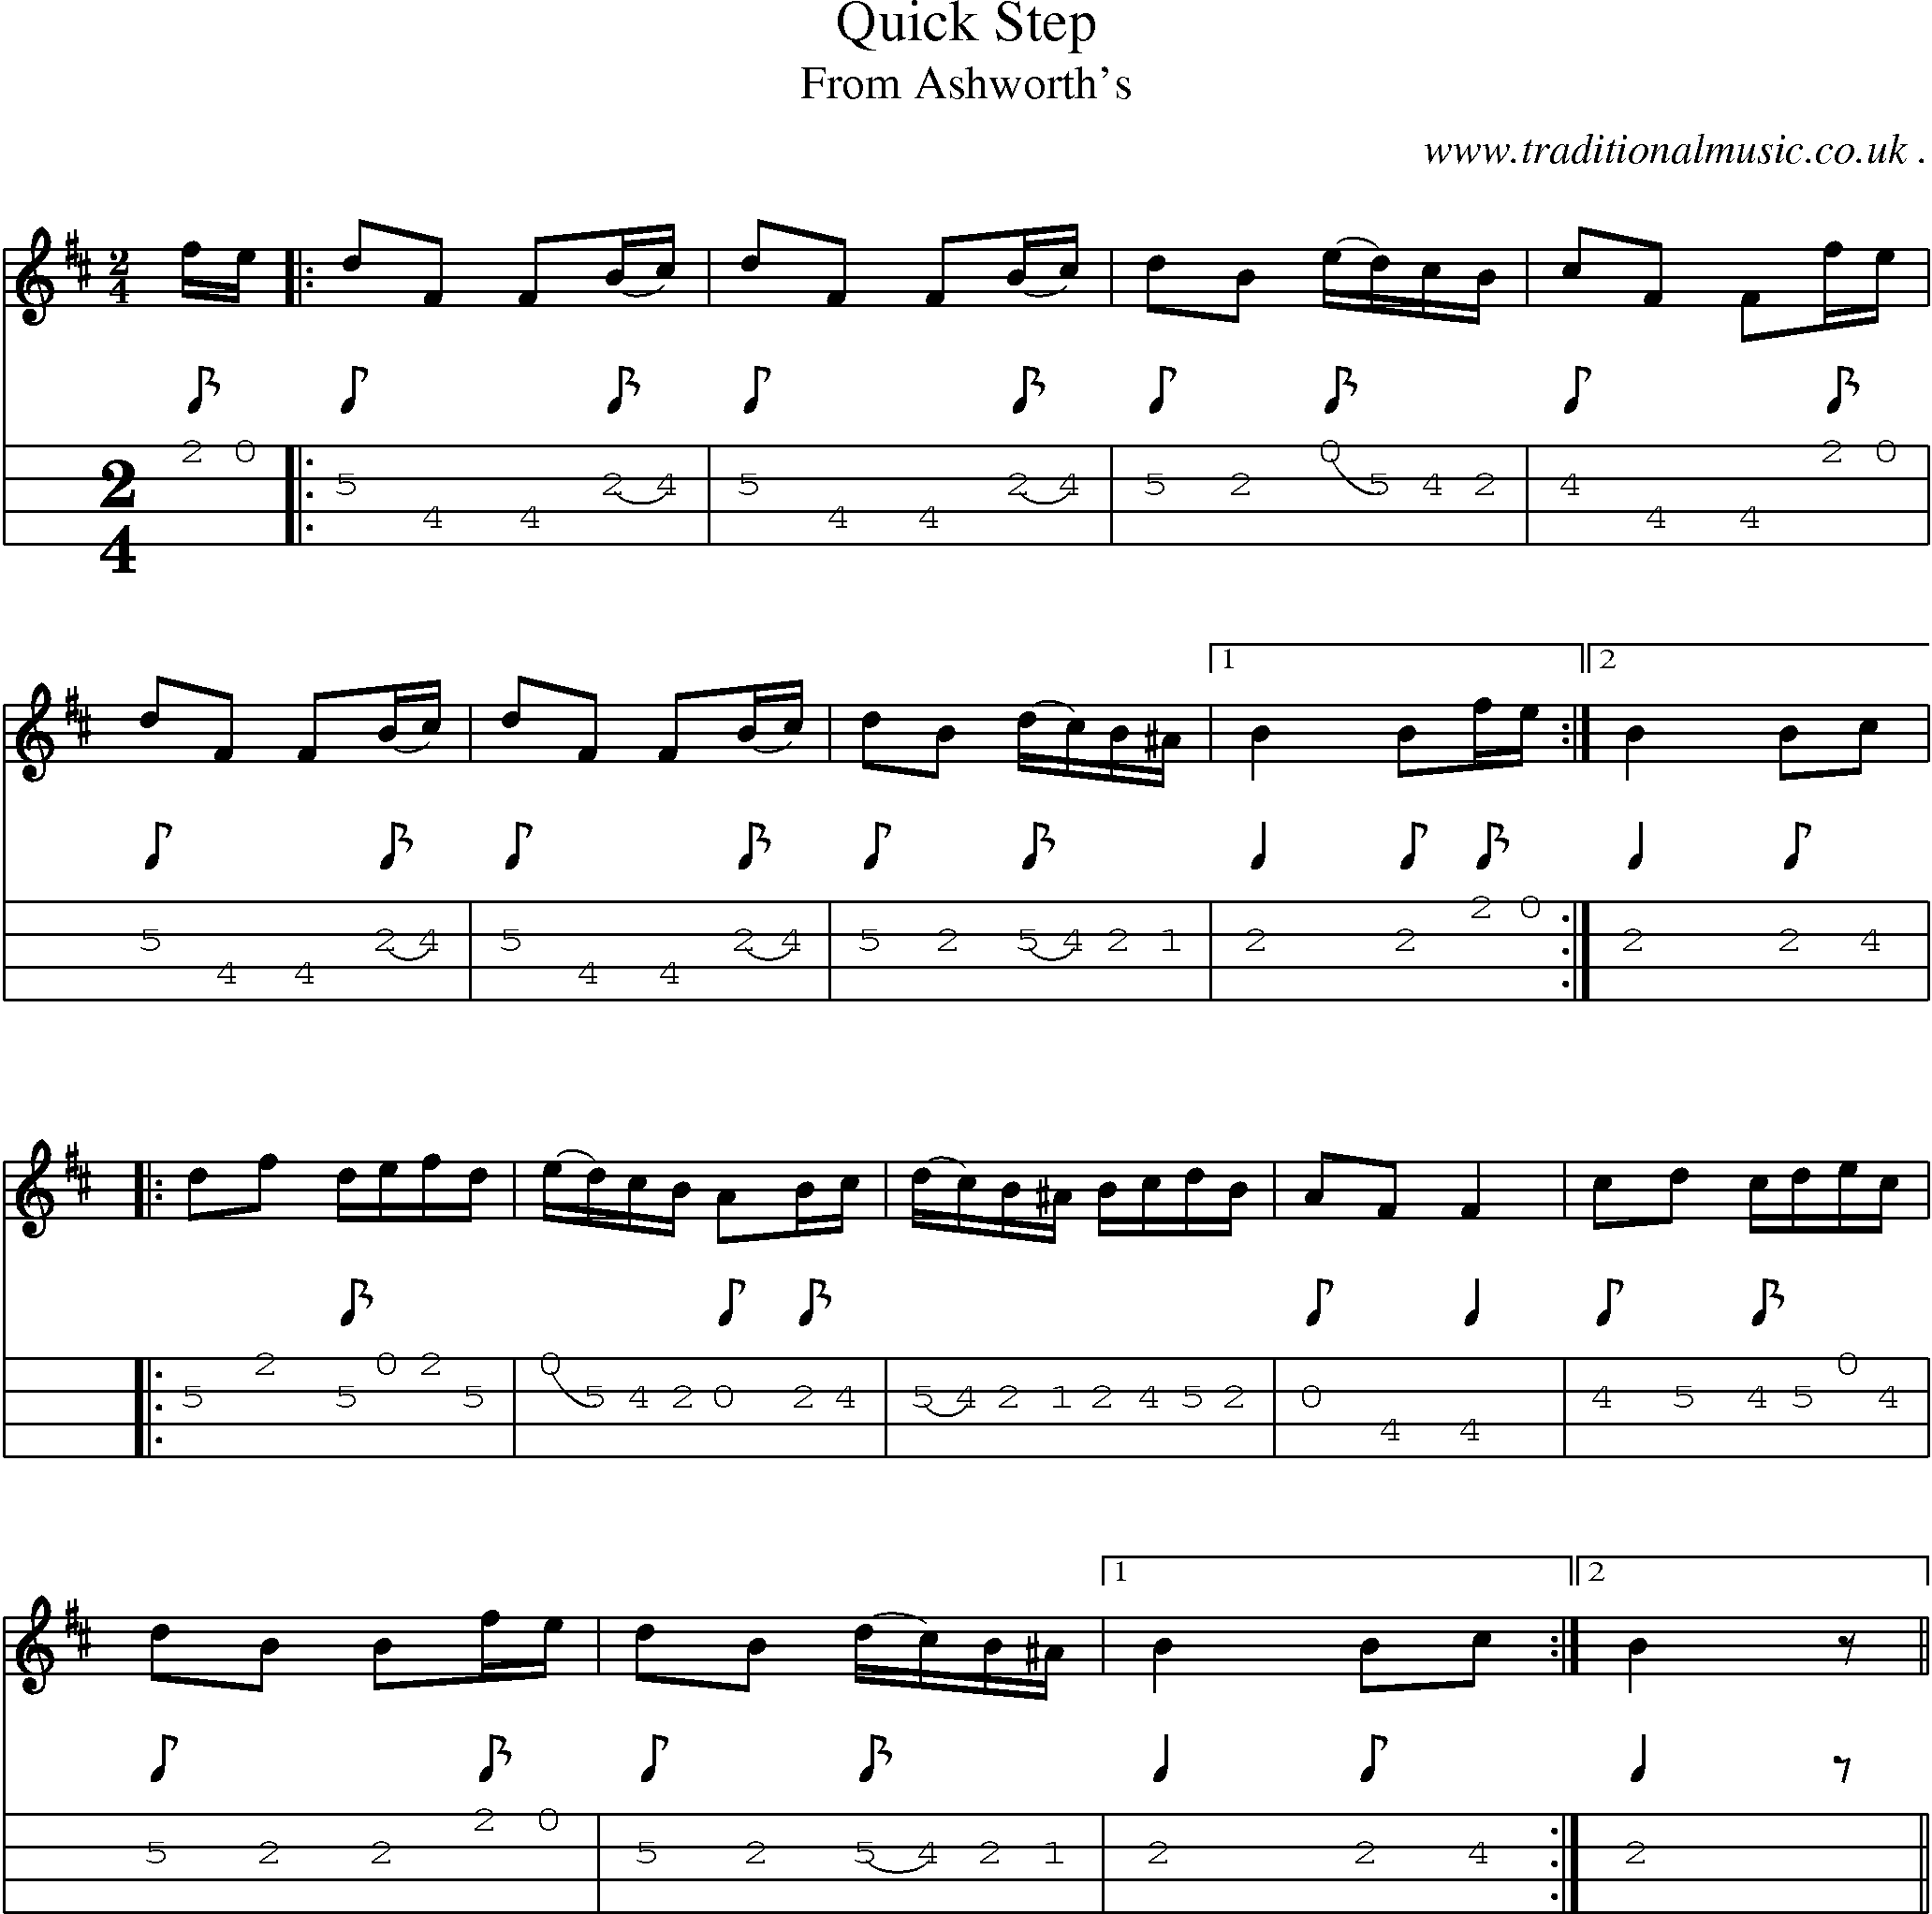 Music Score and Mandolin Tabs for Quick Step